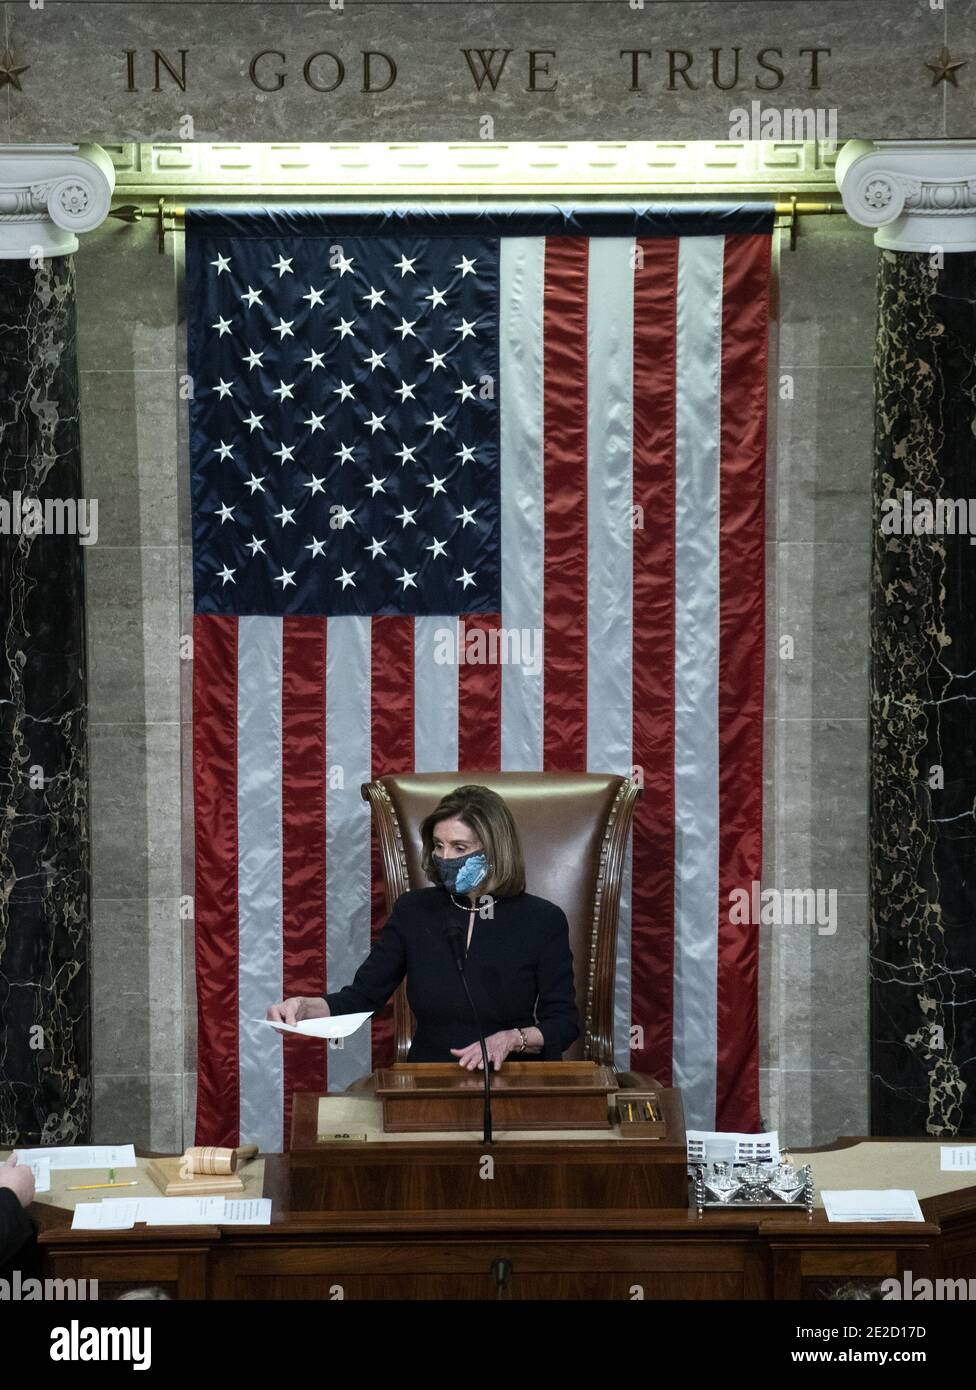 Washington, United States. 13th Jan, 2021. Speaker of the House Nancy Pelosi, D-Calif., presides over the impeachment vote for President Donald J. Trump, in the House Chambers at the U.S. Capitol in Washington, DC on Wednesday, January 13, 2021. The House has voted to impeach President Trump for a second time on charges that he incited an "insurrection" with last week's riot at the U.S. Capitol that left 5 dead. Photo by Kevin Dietsch/UPI Credit: UPI/Alamy Live News Stock Photo